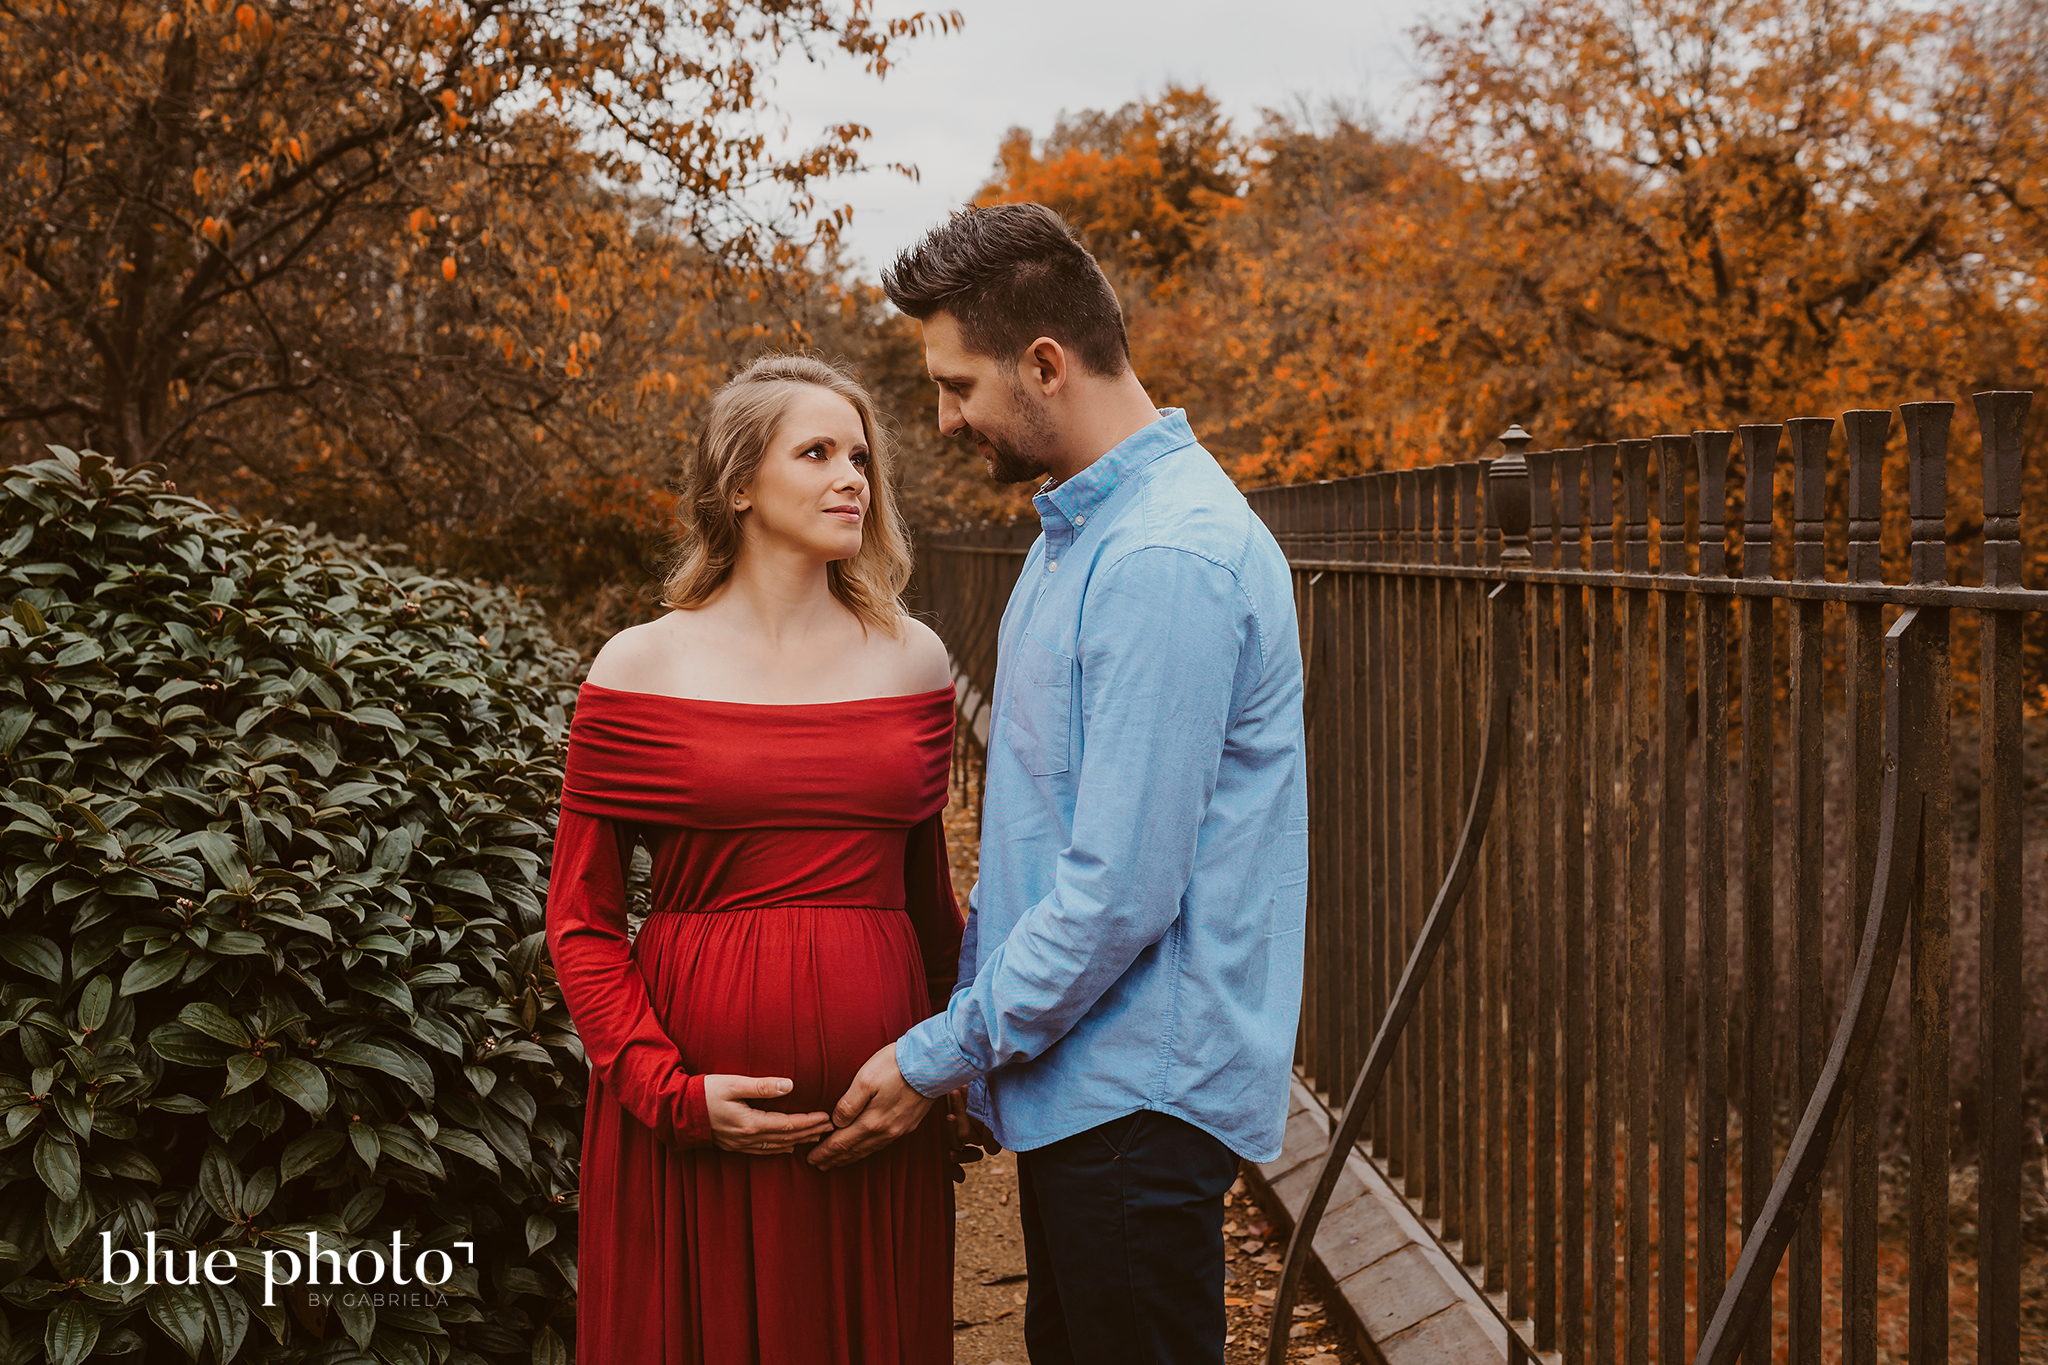 Dominika and her autumn maternity session at Hill Garden and Pergola, North London